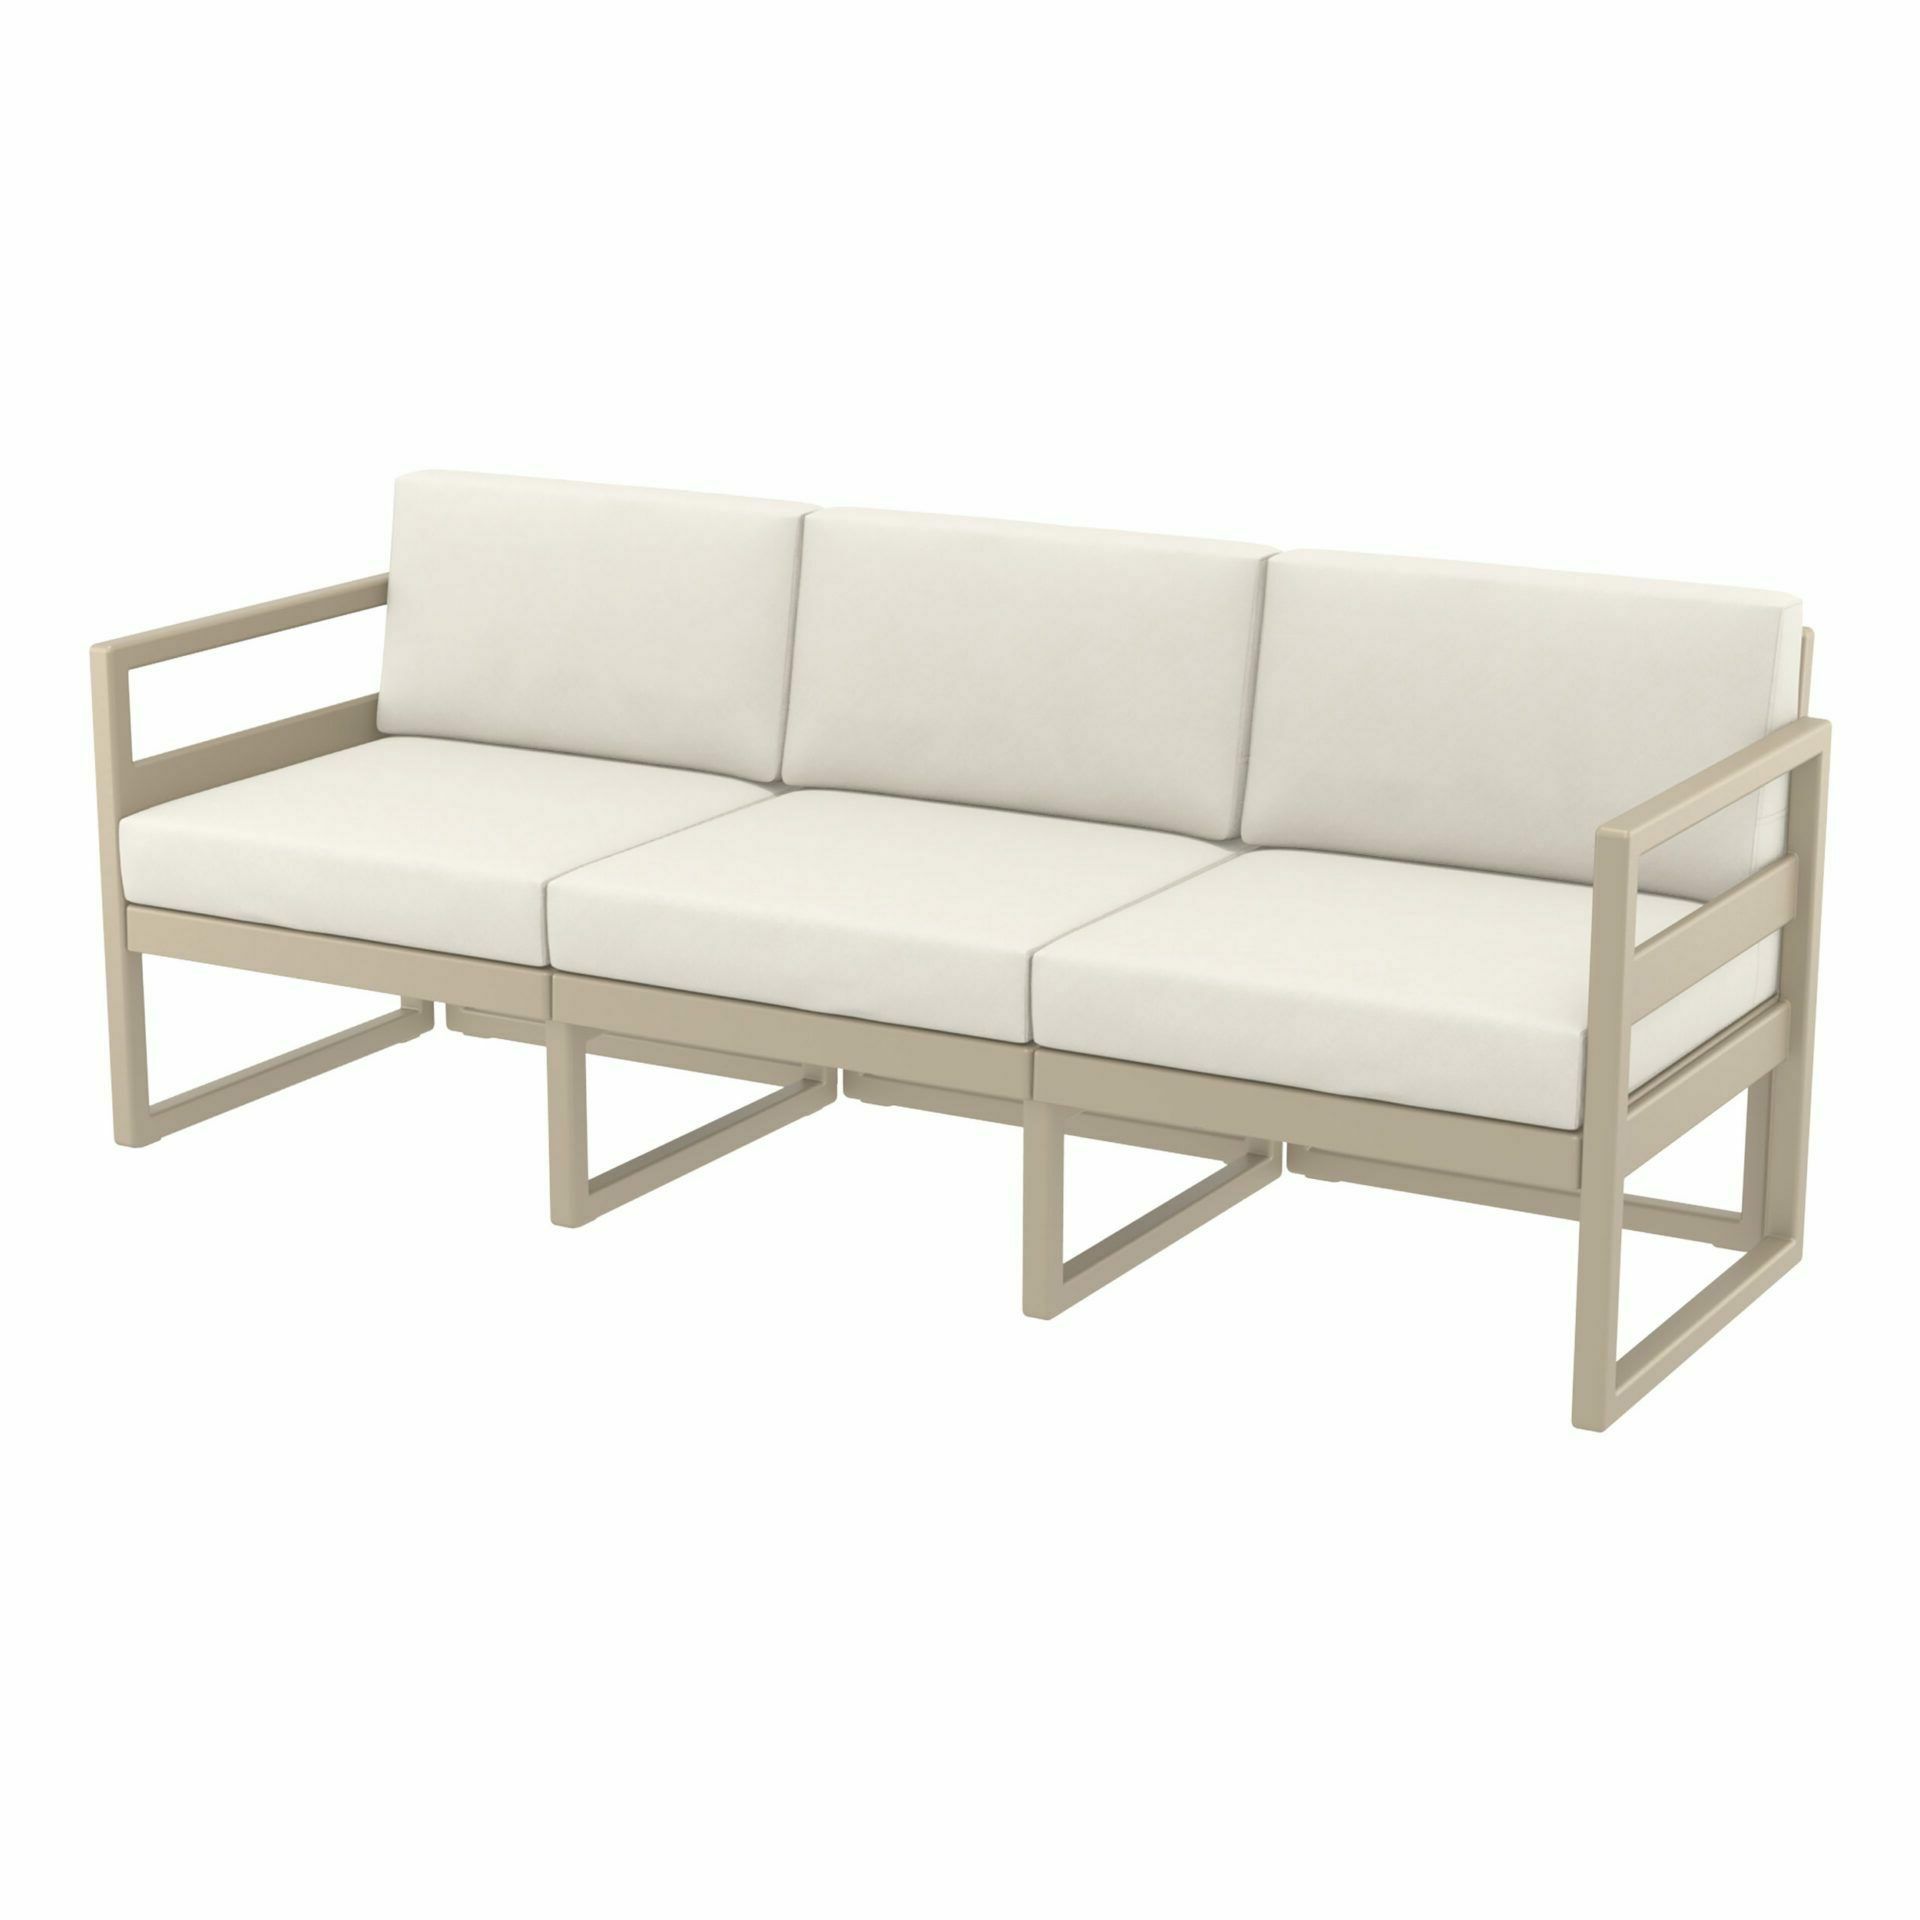 Mykonos Lounge Sofa XL - Taupe with Beige Cushions